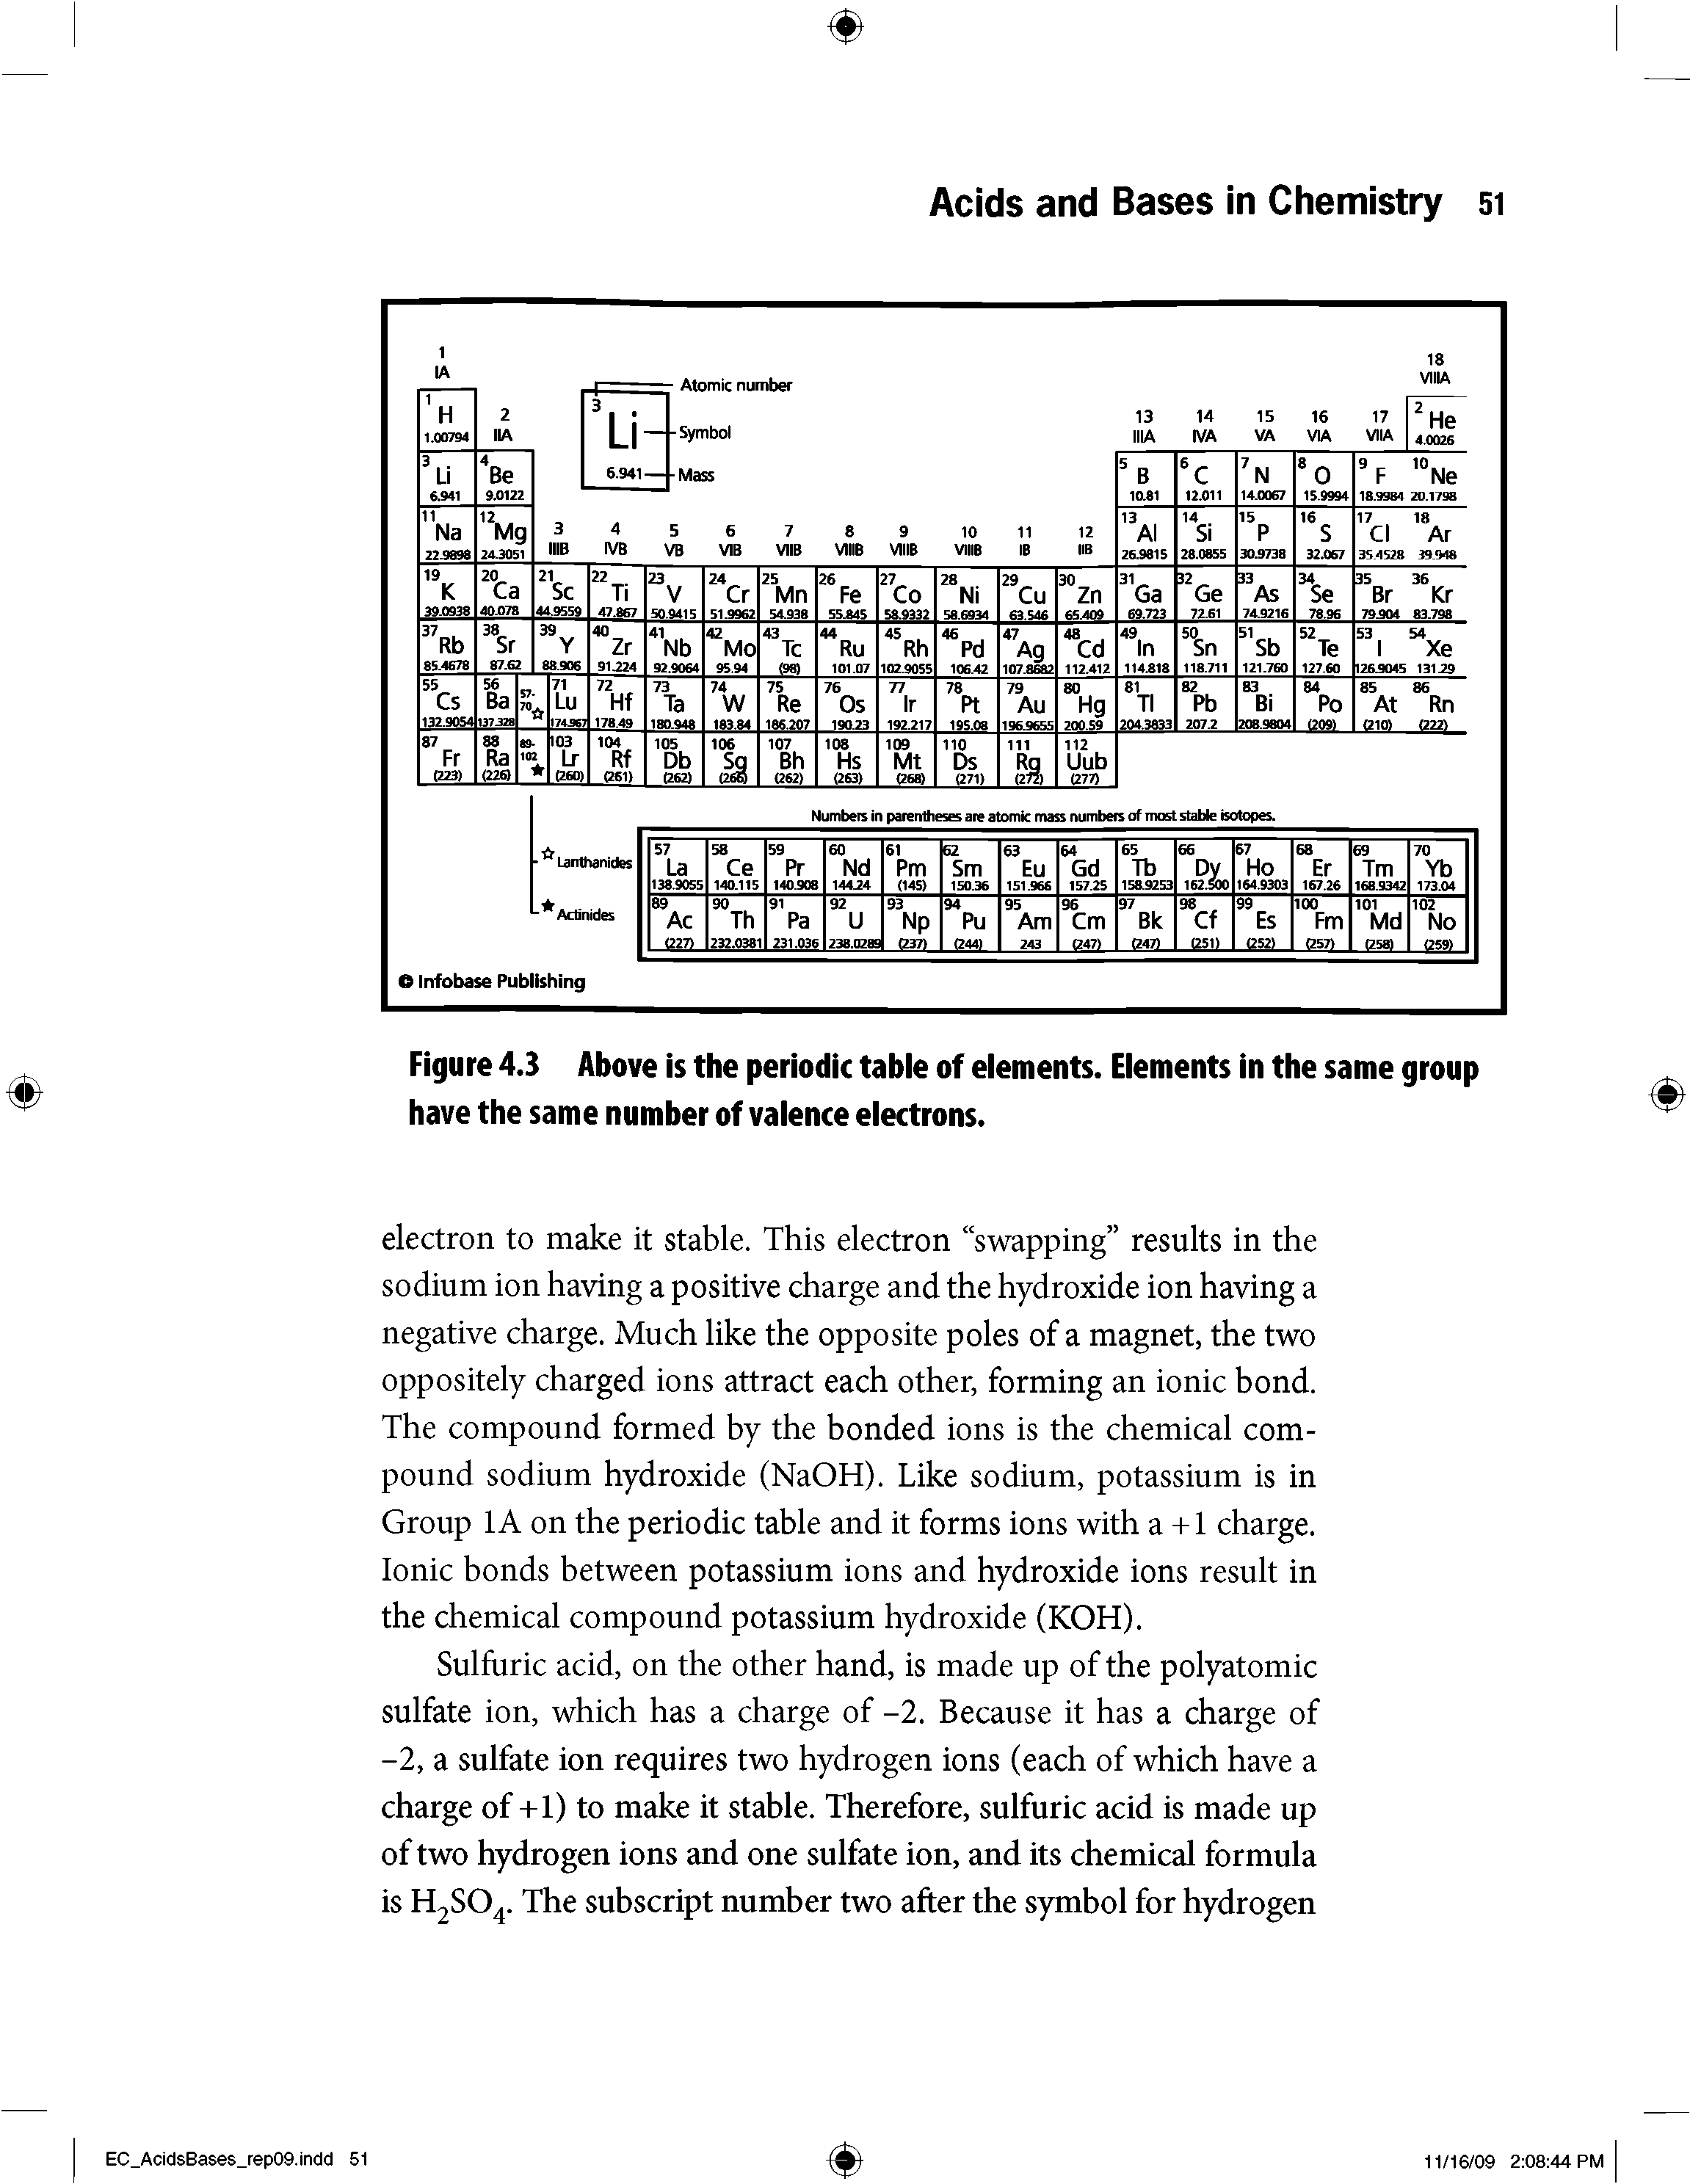 Figure 4.3 Above is the periodic table of elements. Elements in the same group have the same number of valence electrons.